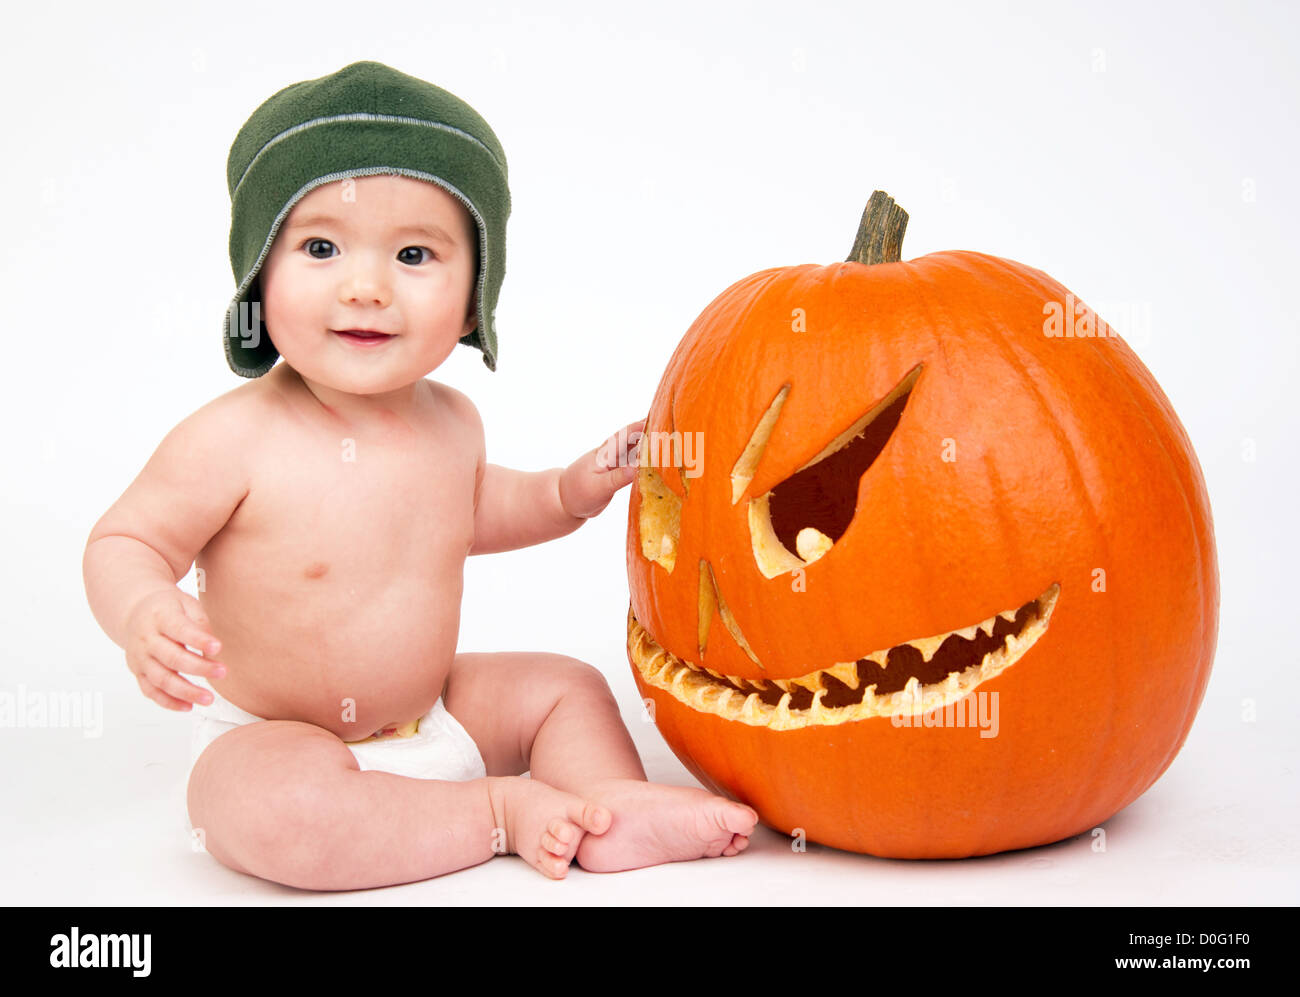 Young male sits next to a pumpkin on white Stock Photo